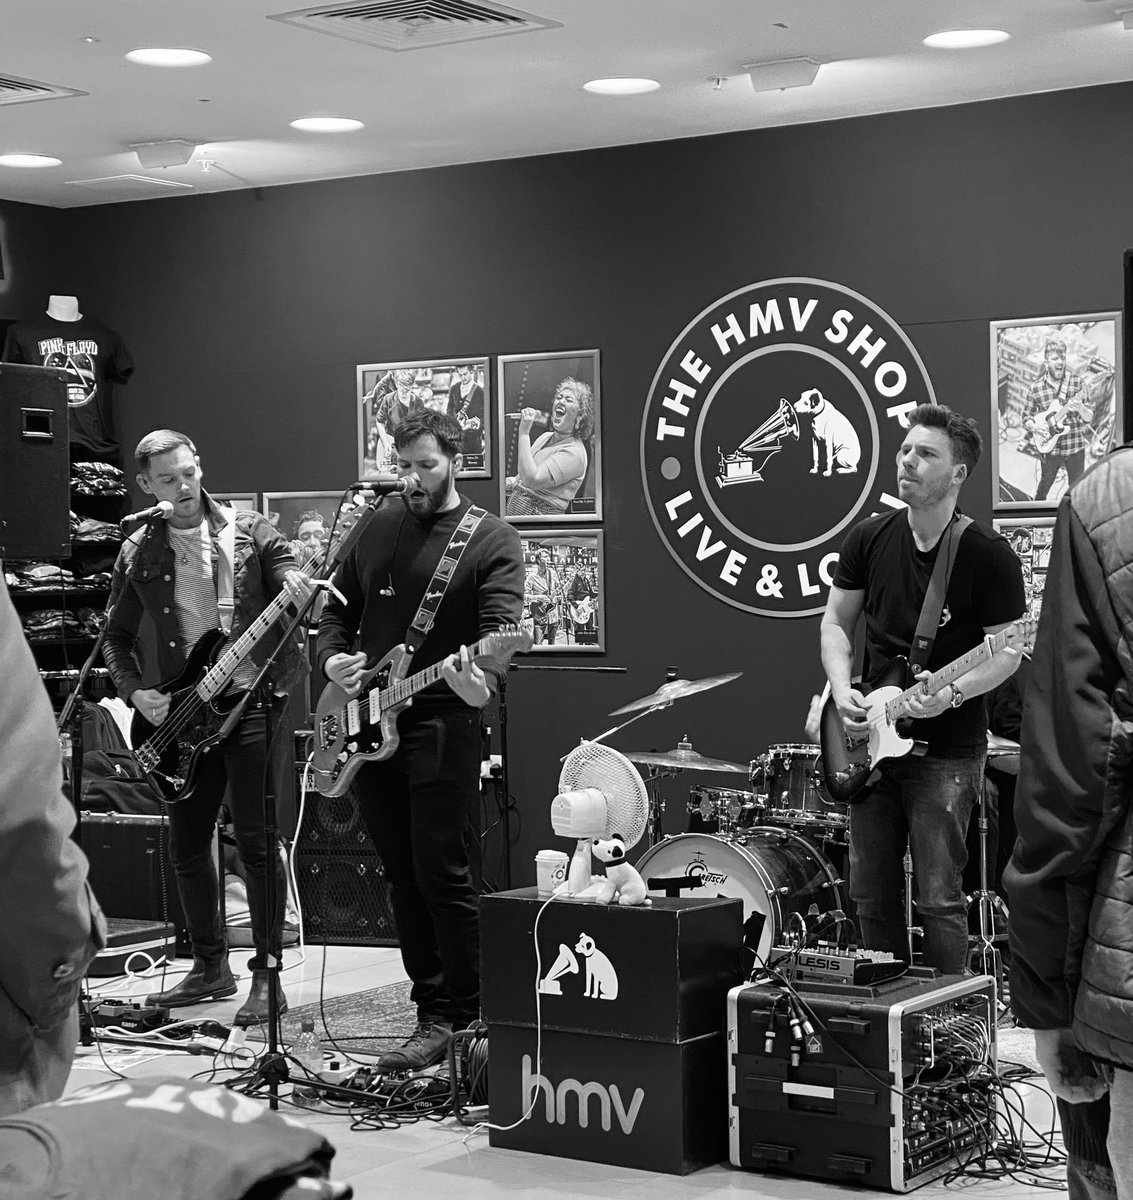 @hmvChester @ShitChester Band on today, think they were The Montagues. Great live music.